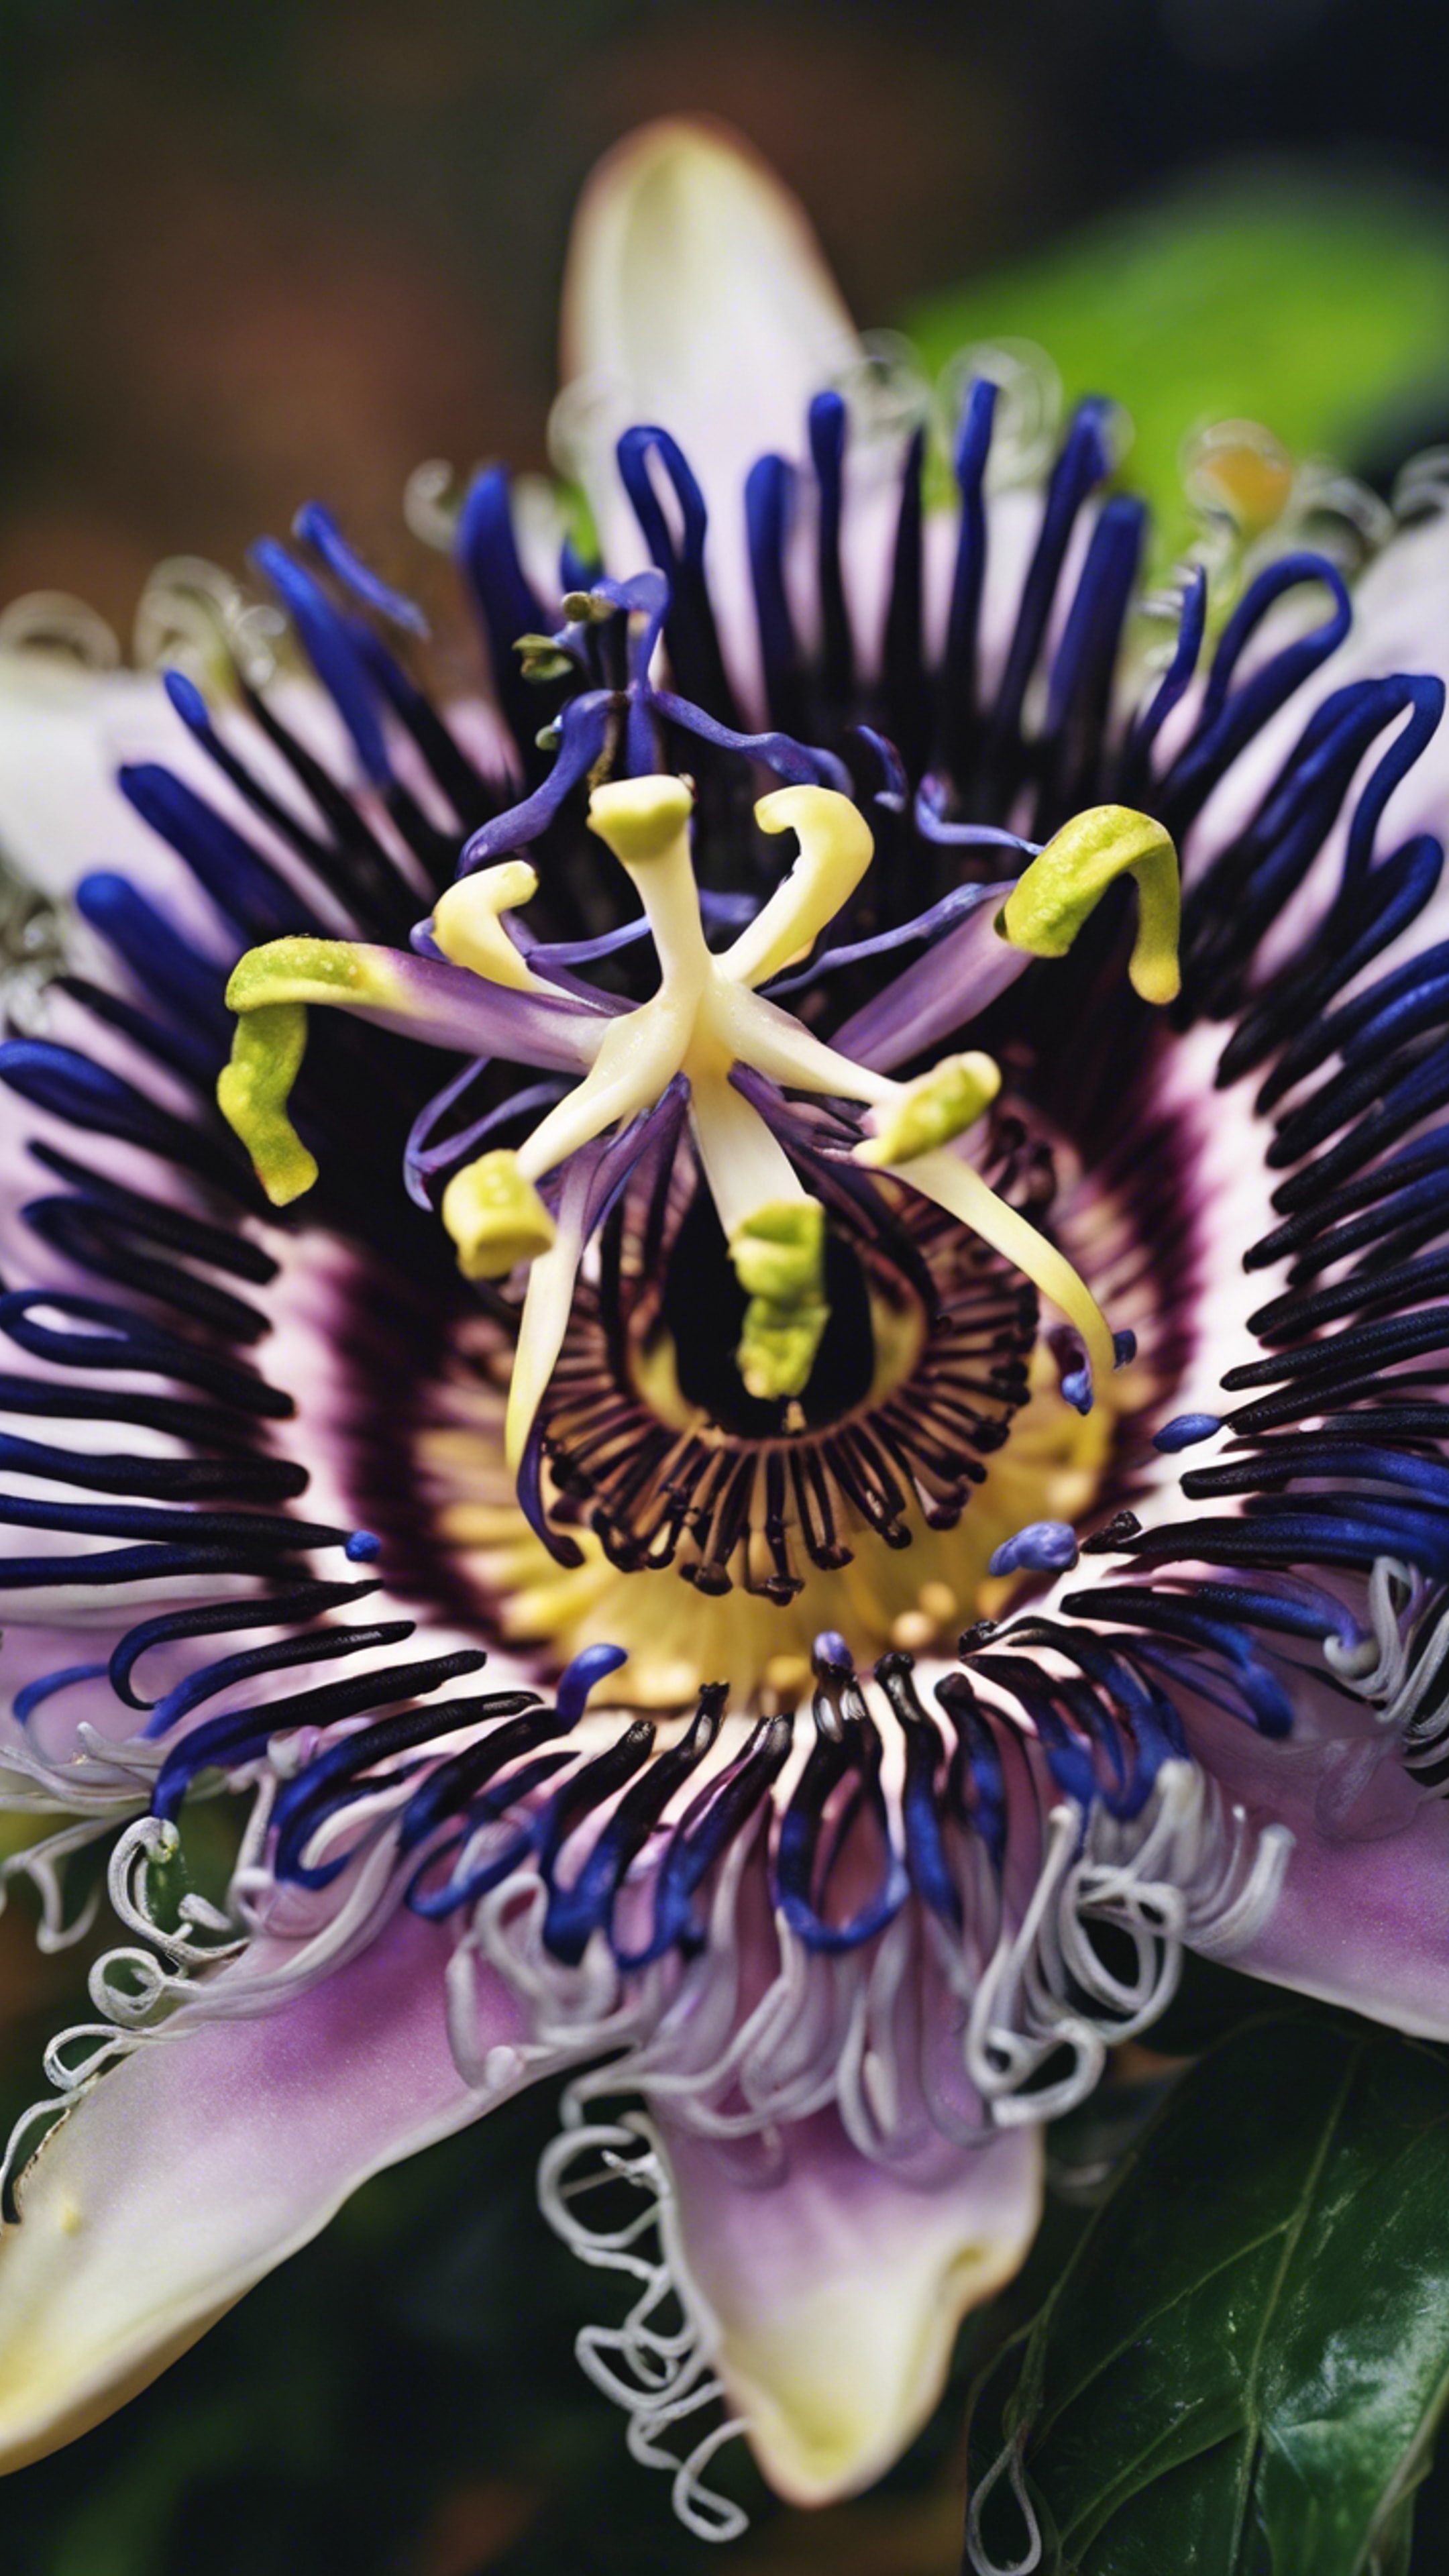 A painting of an exotic black passion flower, its intricate design encompassing a sense of magic and wonder.壁紙[3d4ff6ed559c4a328ed3]